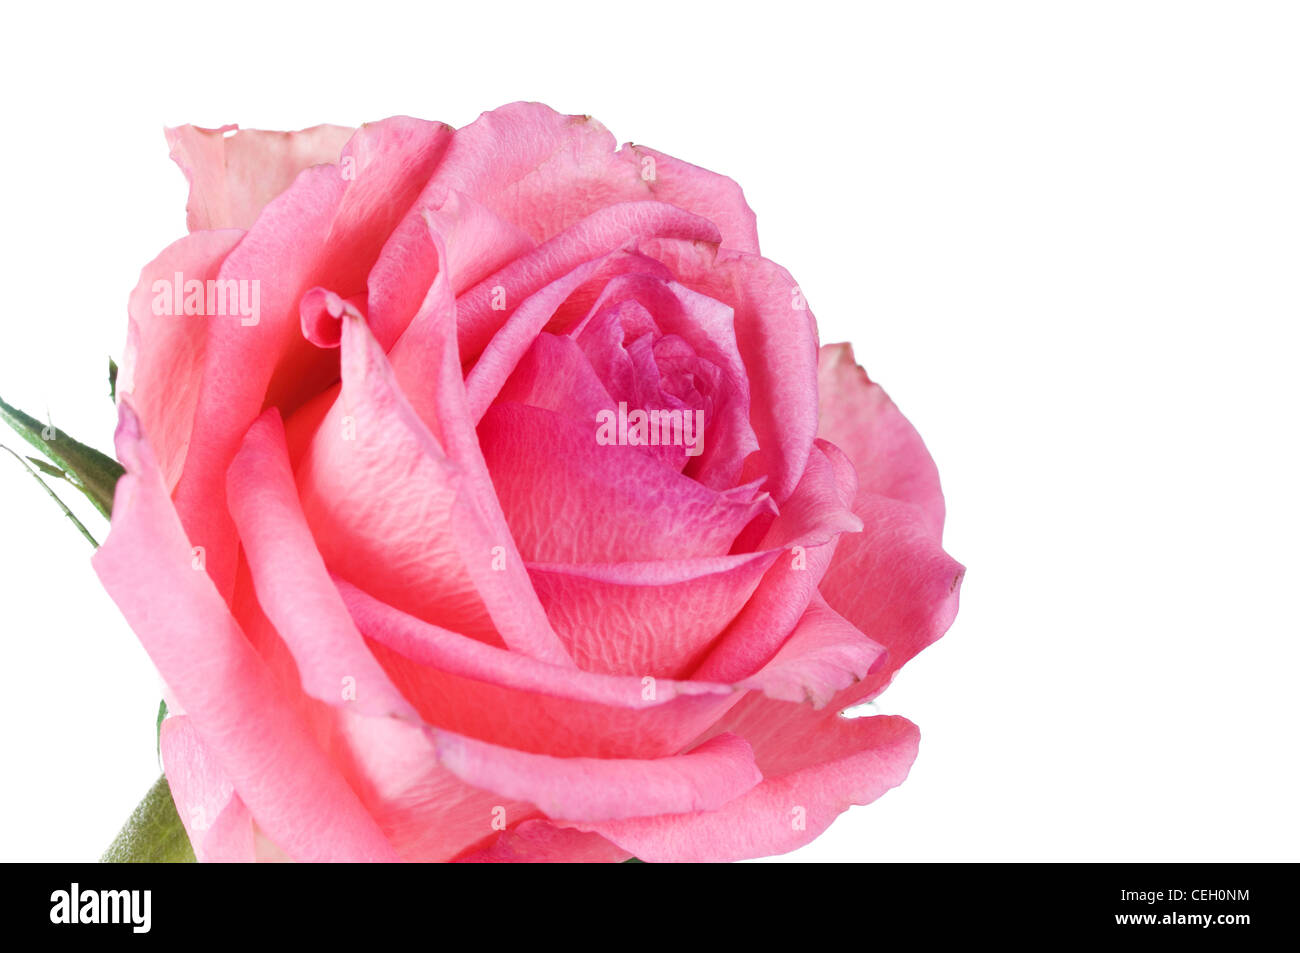 Pink Rose head against plain white background Stock Photo